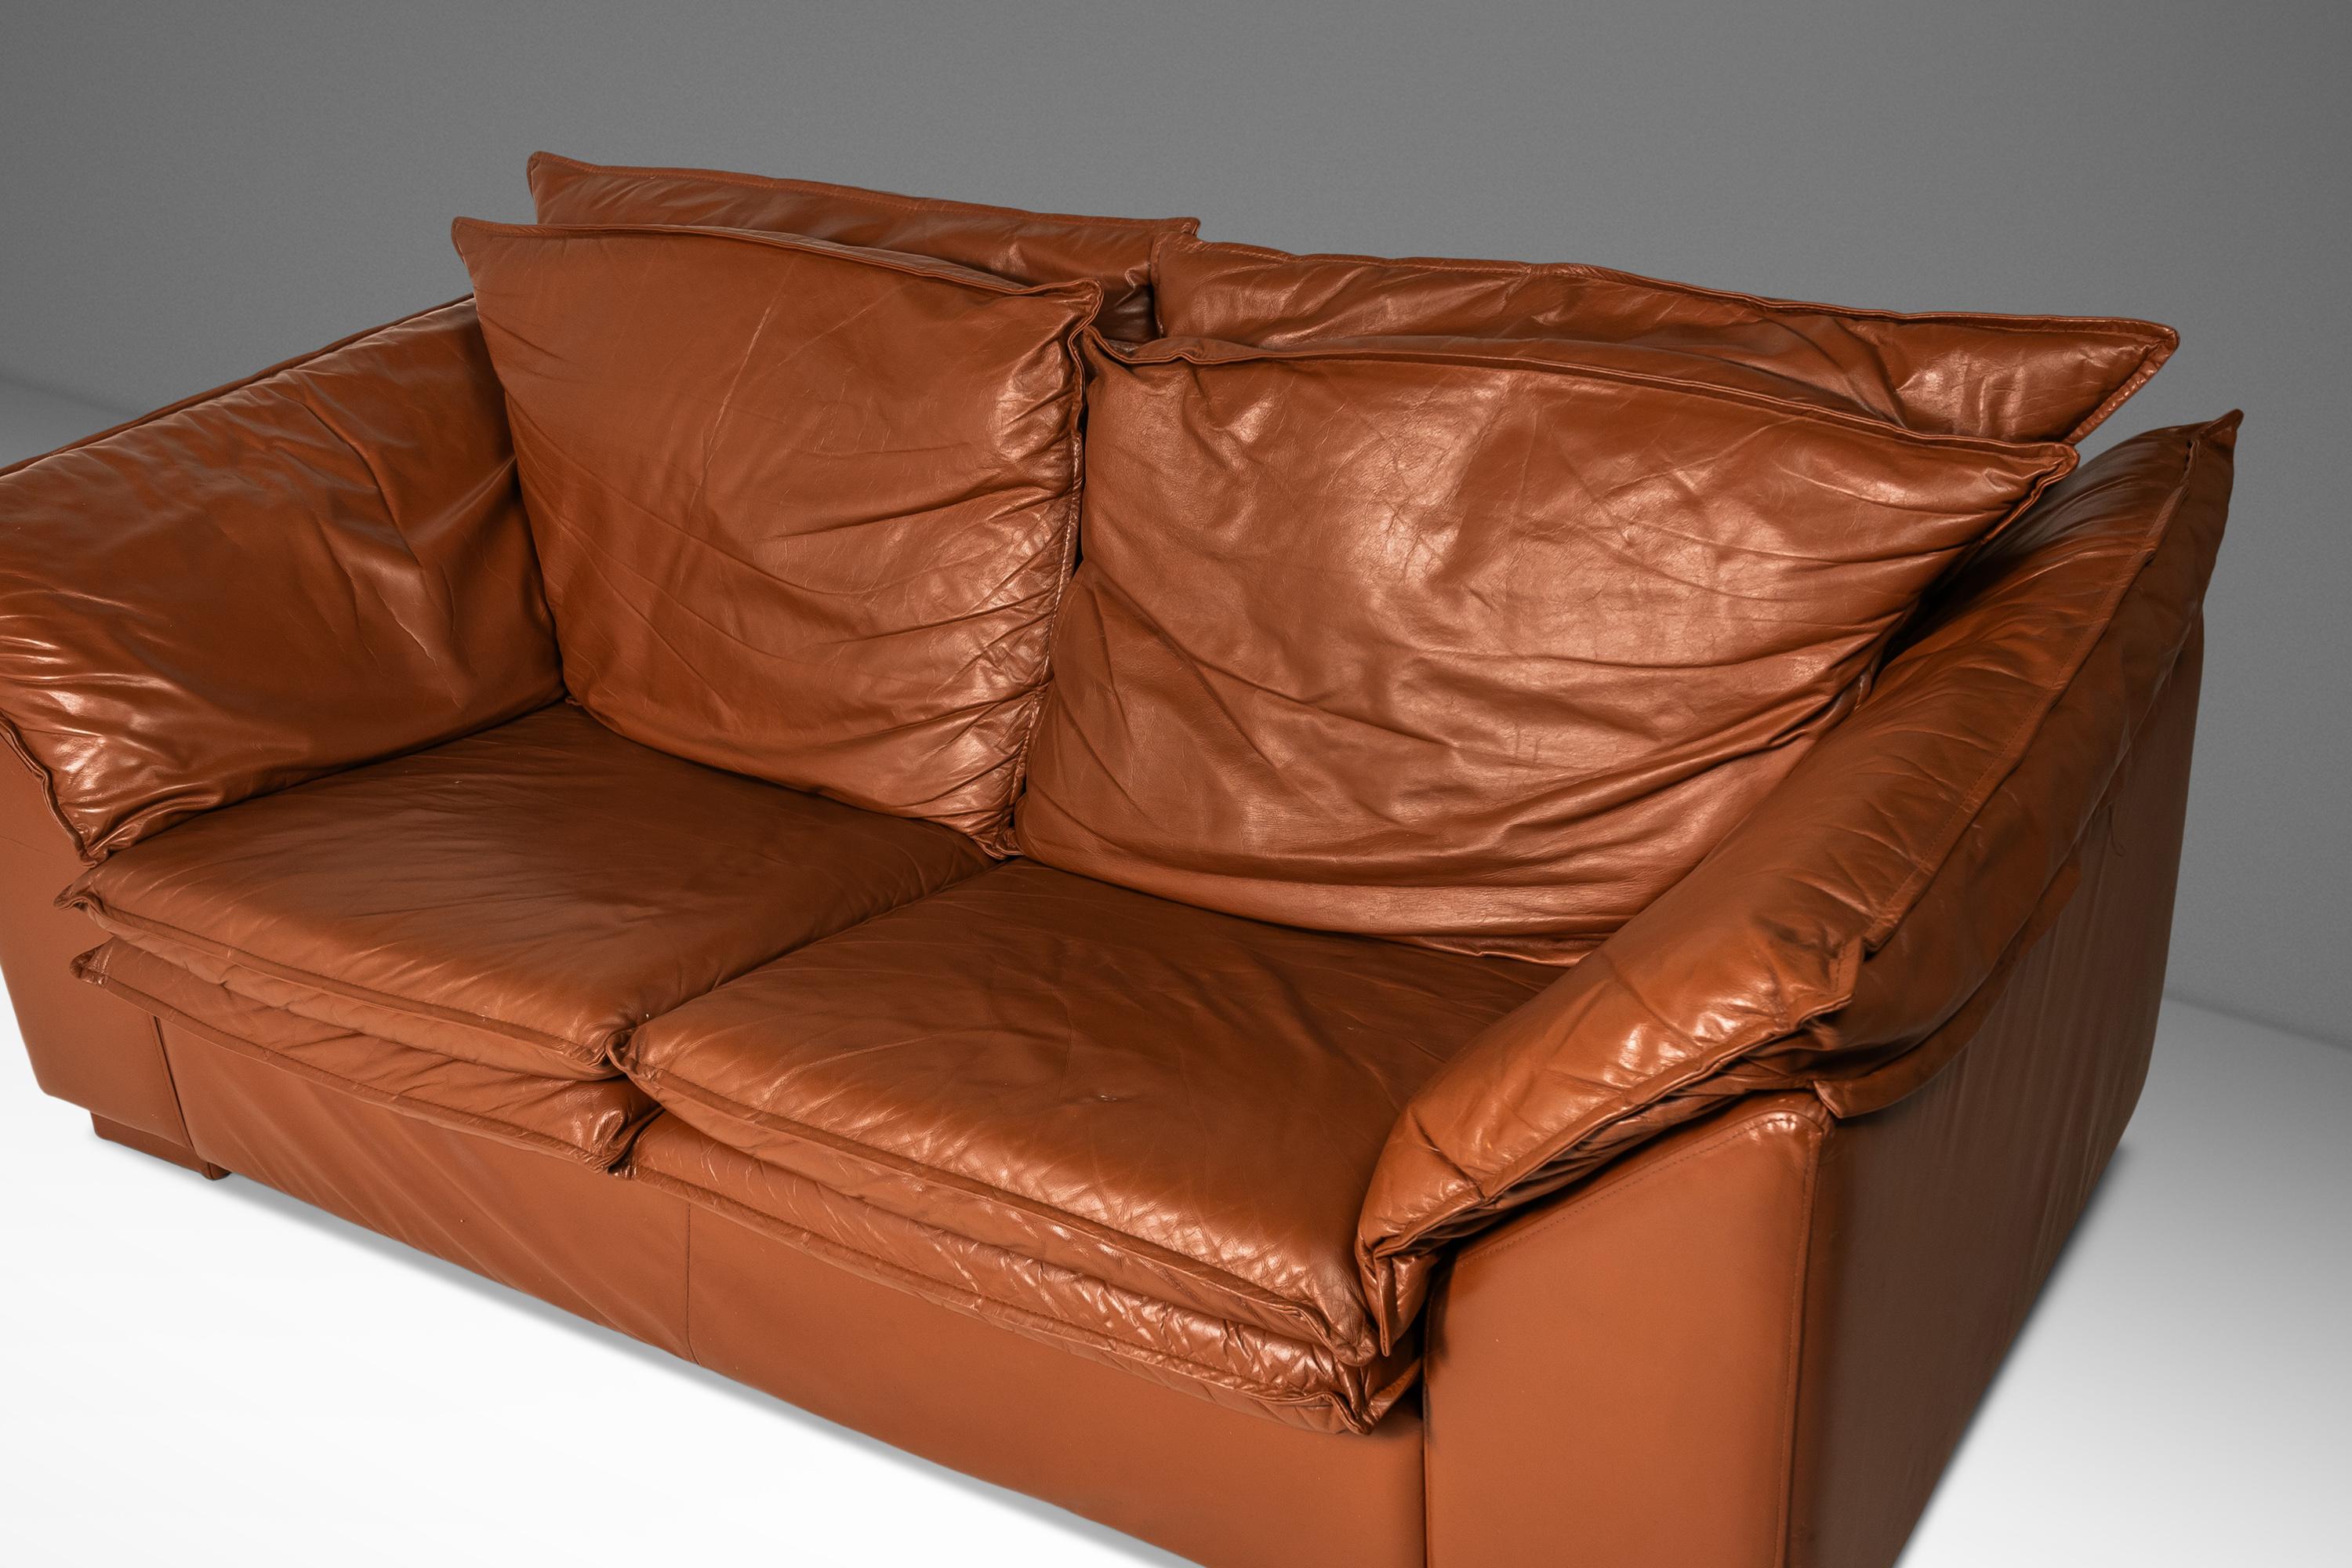 Low Profile Loveseat Sofa in Leather in the Manner of Niels Eilersen, c. 1980's For Sale 10